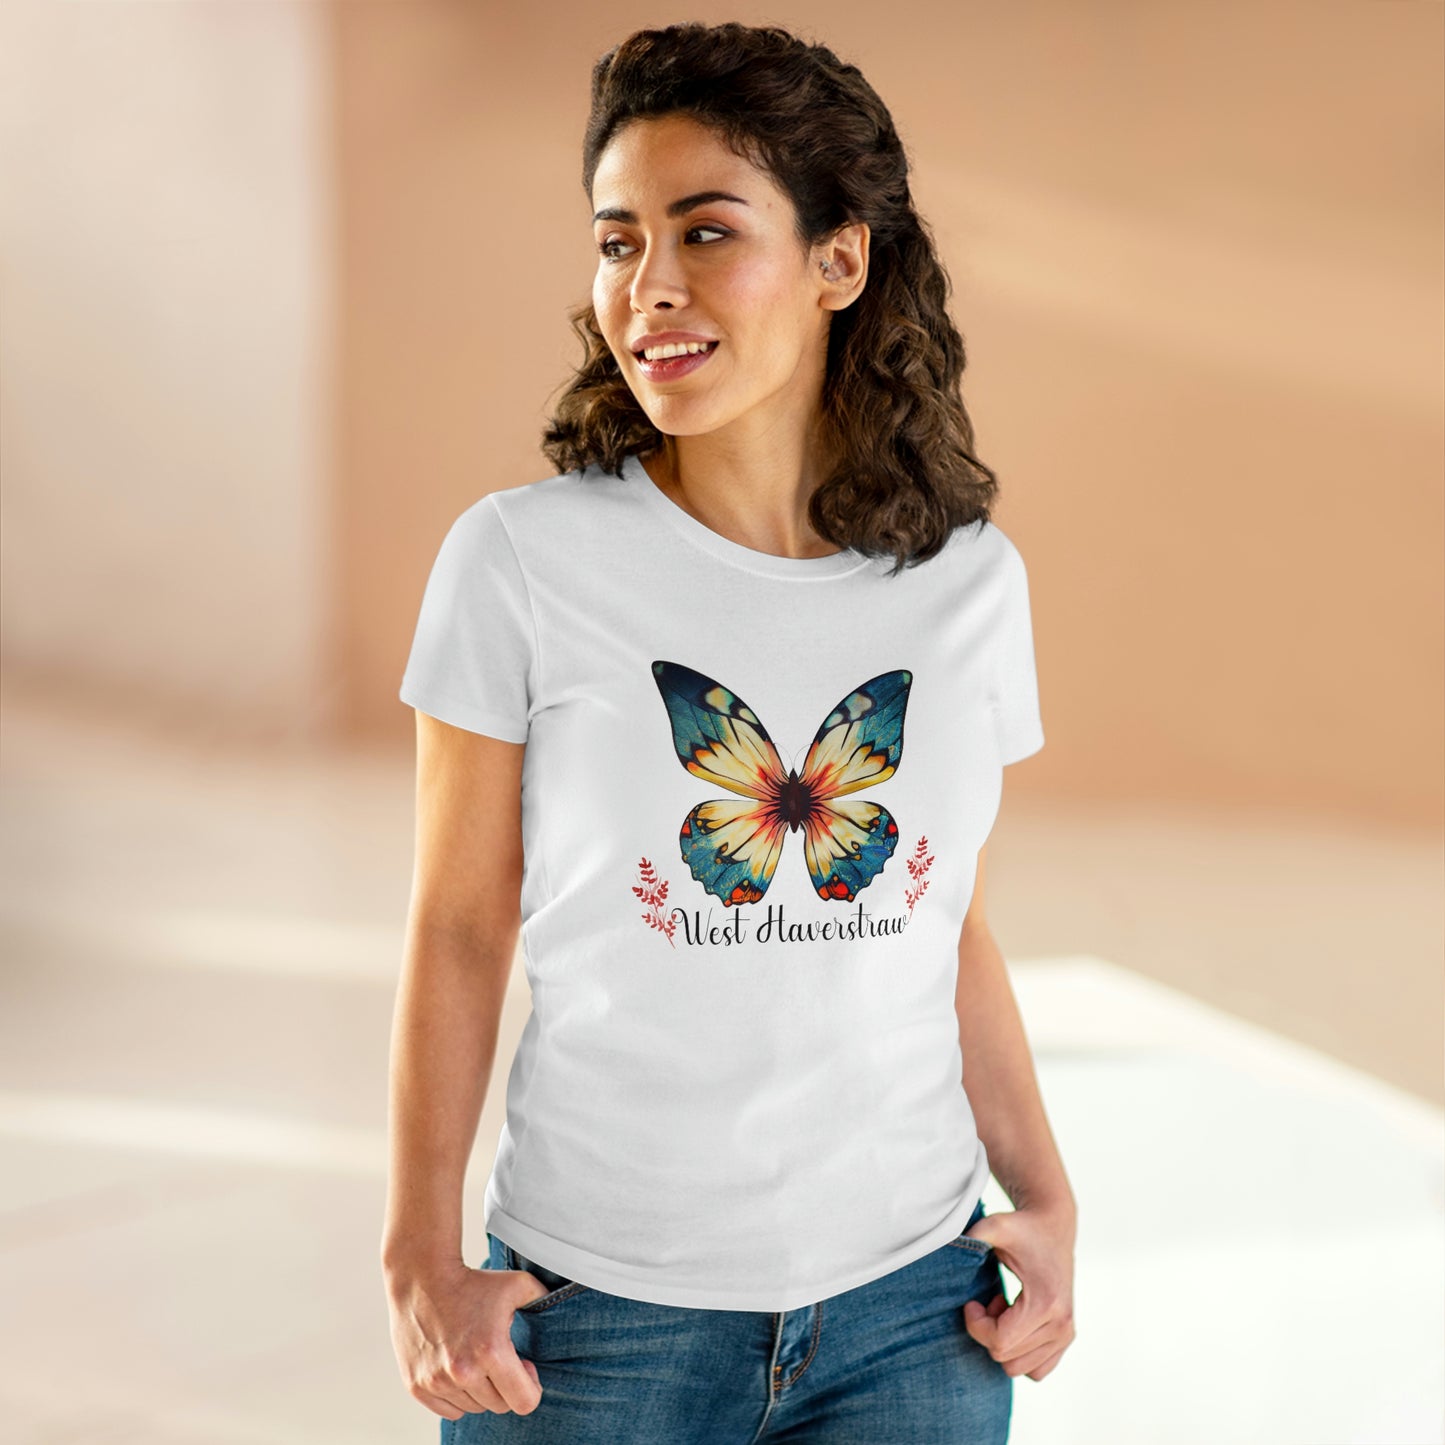 Butterfly West Haverstraw Tee